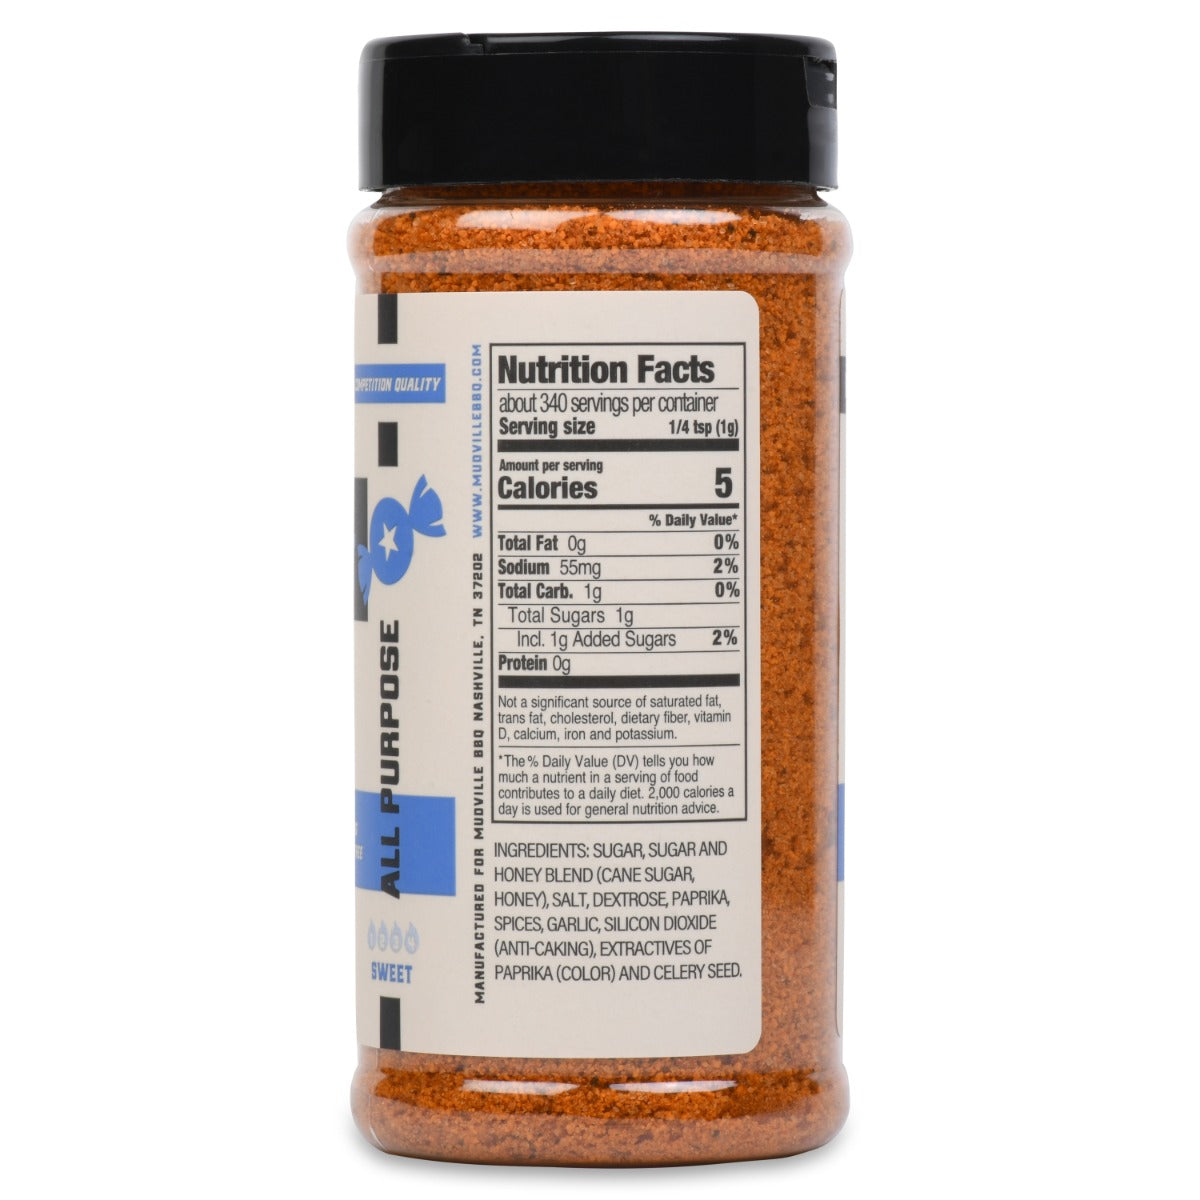 Right view of a "Prime Sweet" rub bottle from Mudville BBQ, showing the nutrition facts label and a list of ingredients, including sugar, honey, salt, paprika, garlic, and spices.